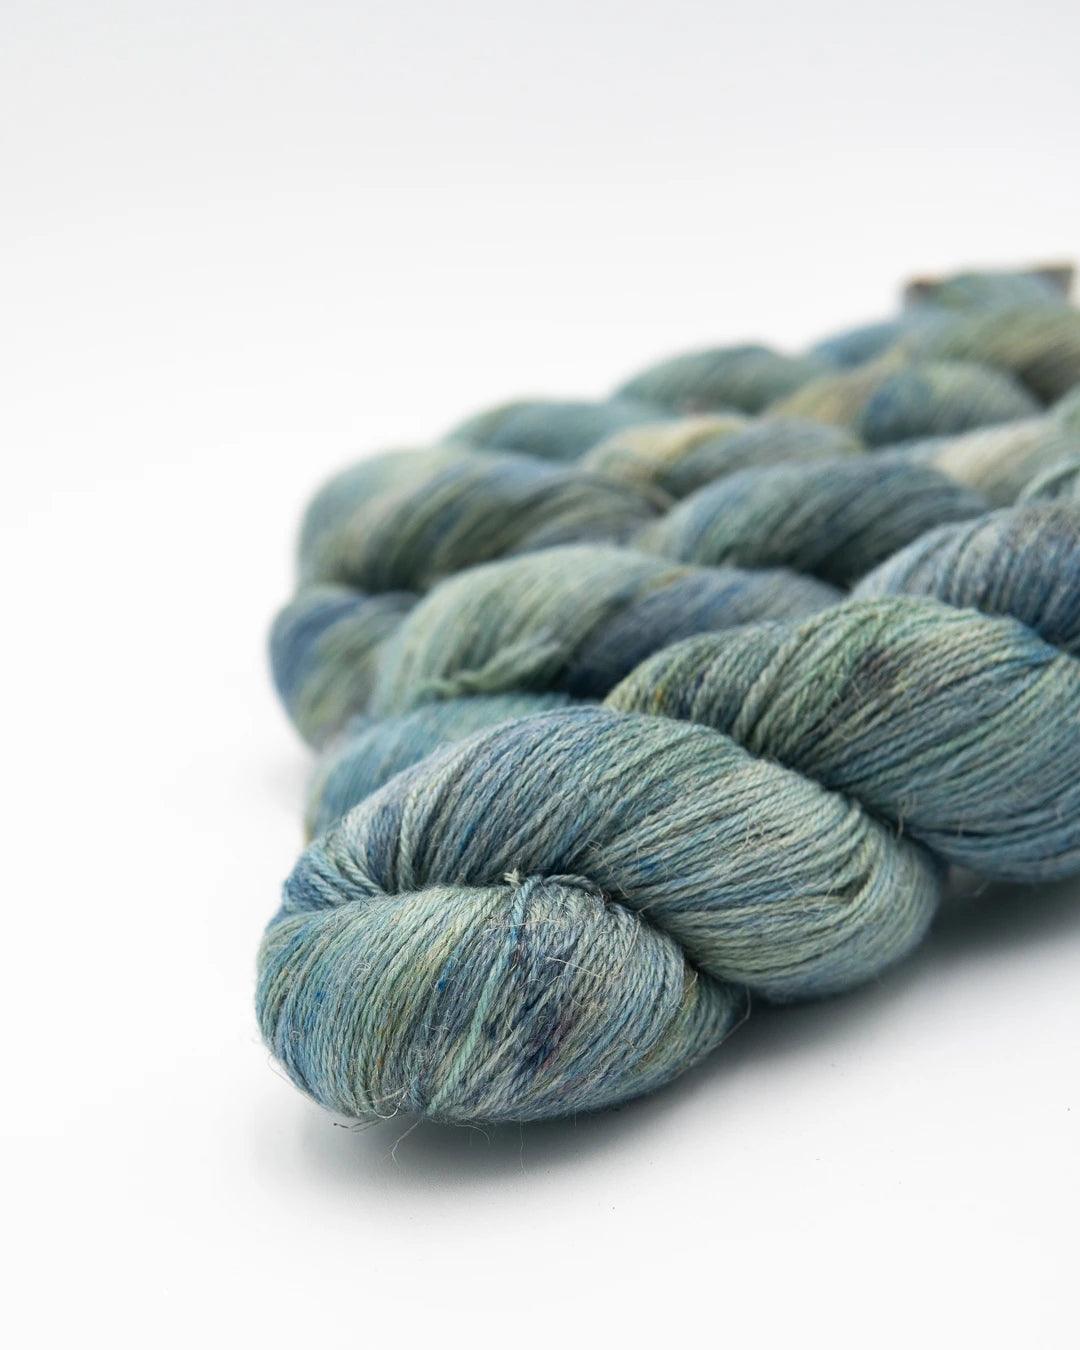 "The Girl Who Fell From the Sky" colorway of this yarn. It's blue with speckles.